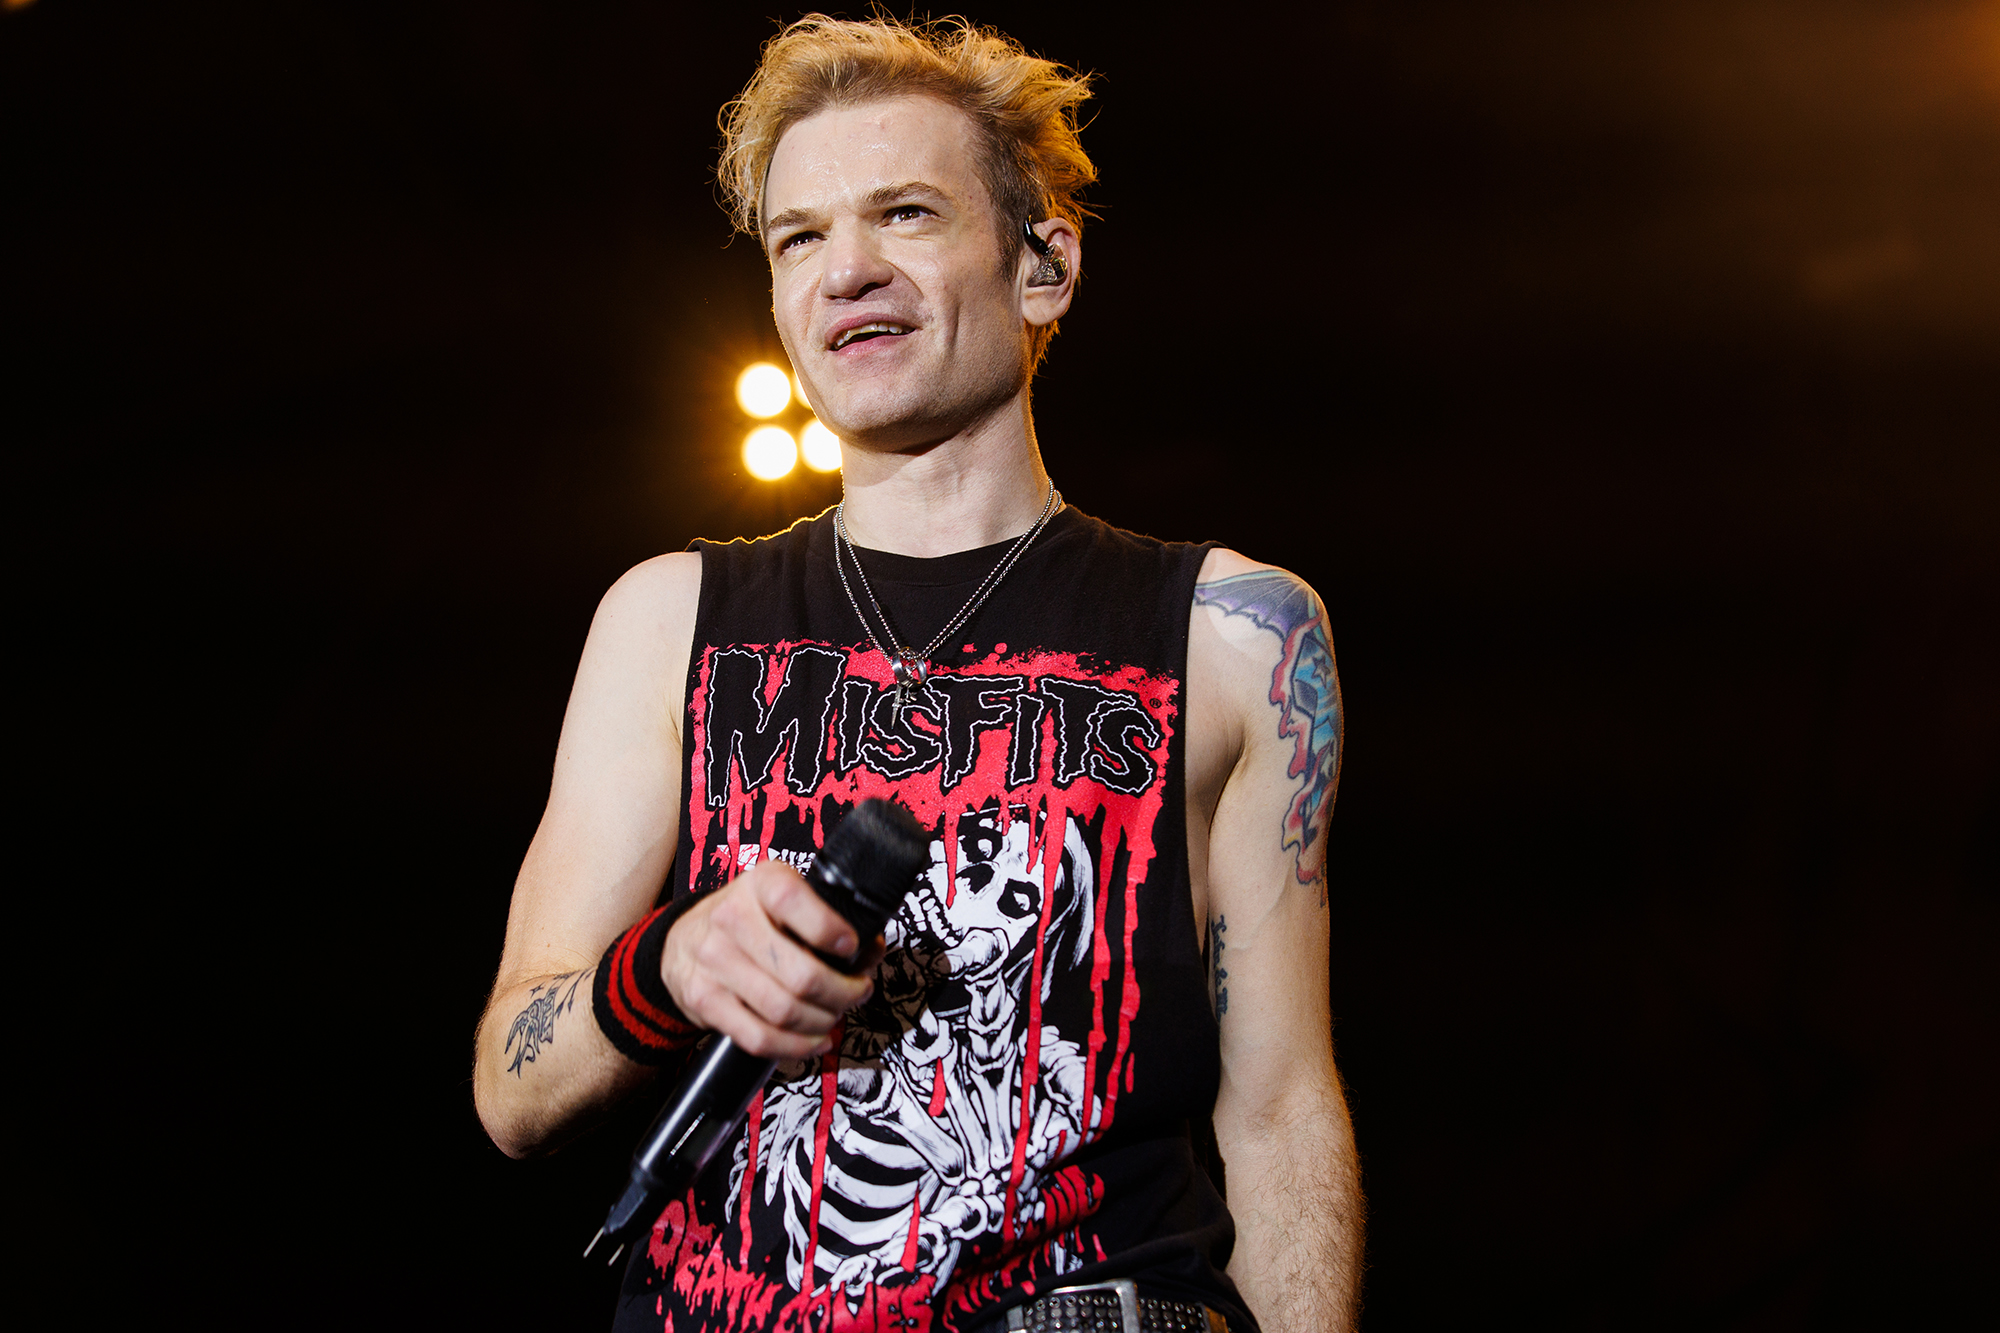 Sum 41 Singer Deryck Whibley Discharged From Hospital, Wife Ari